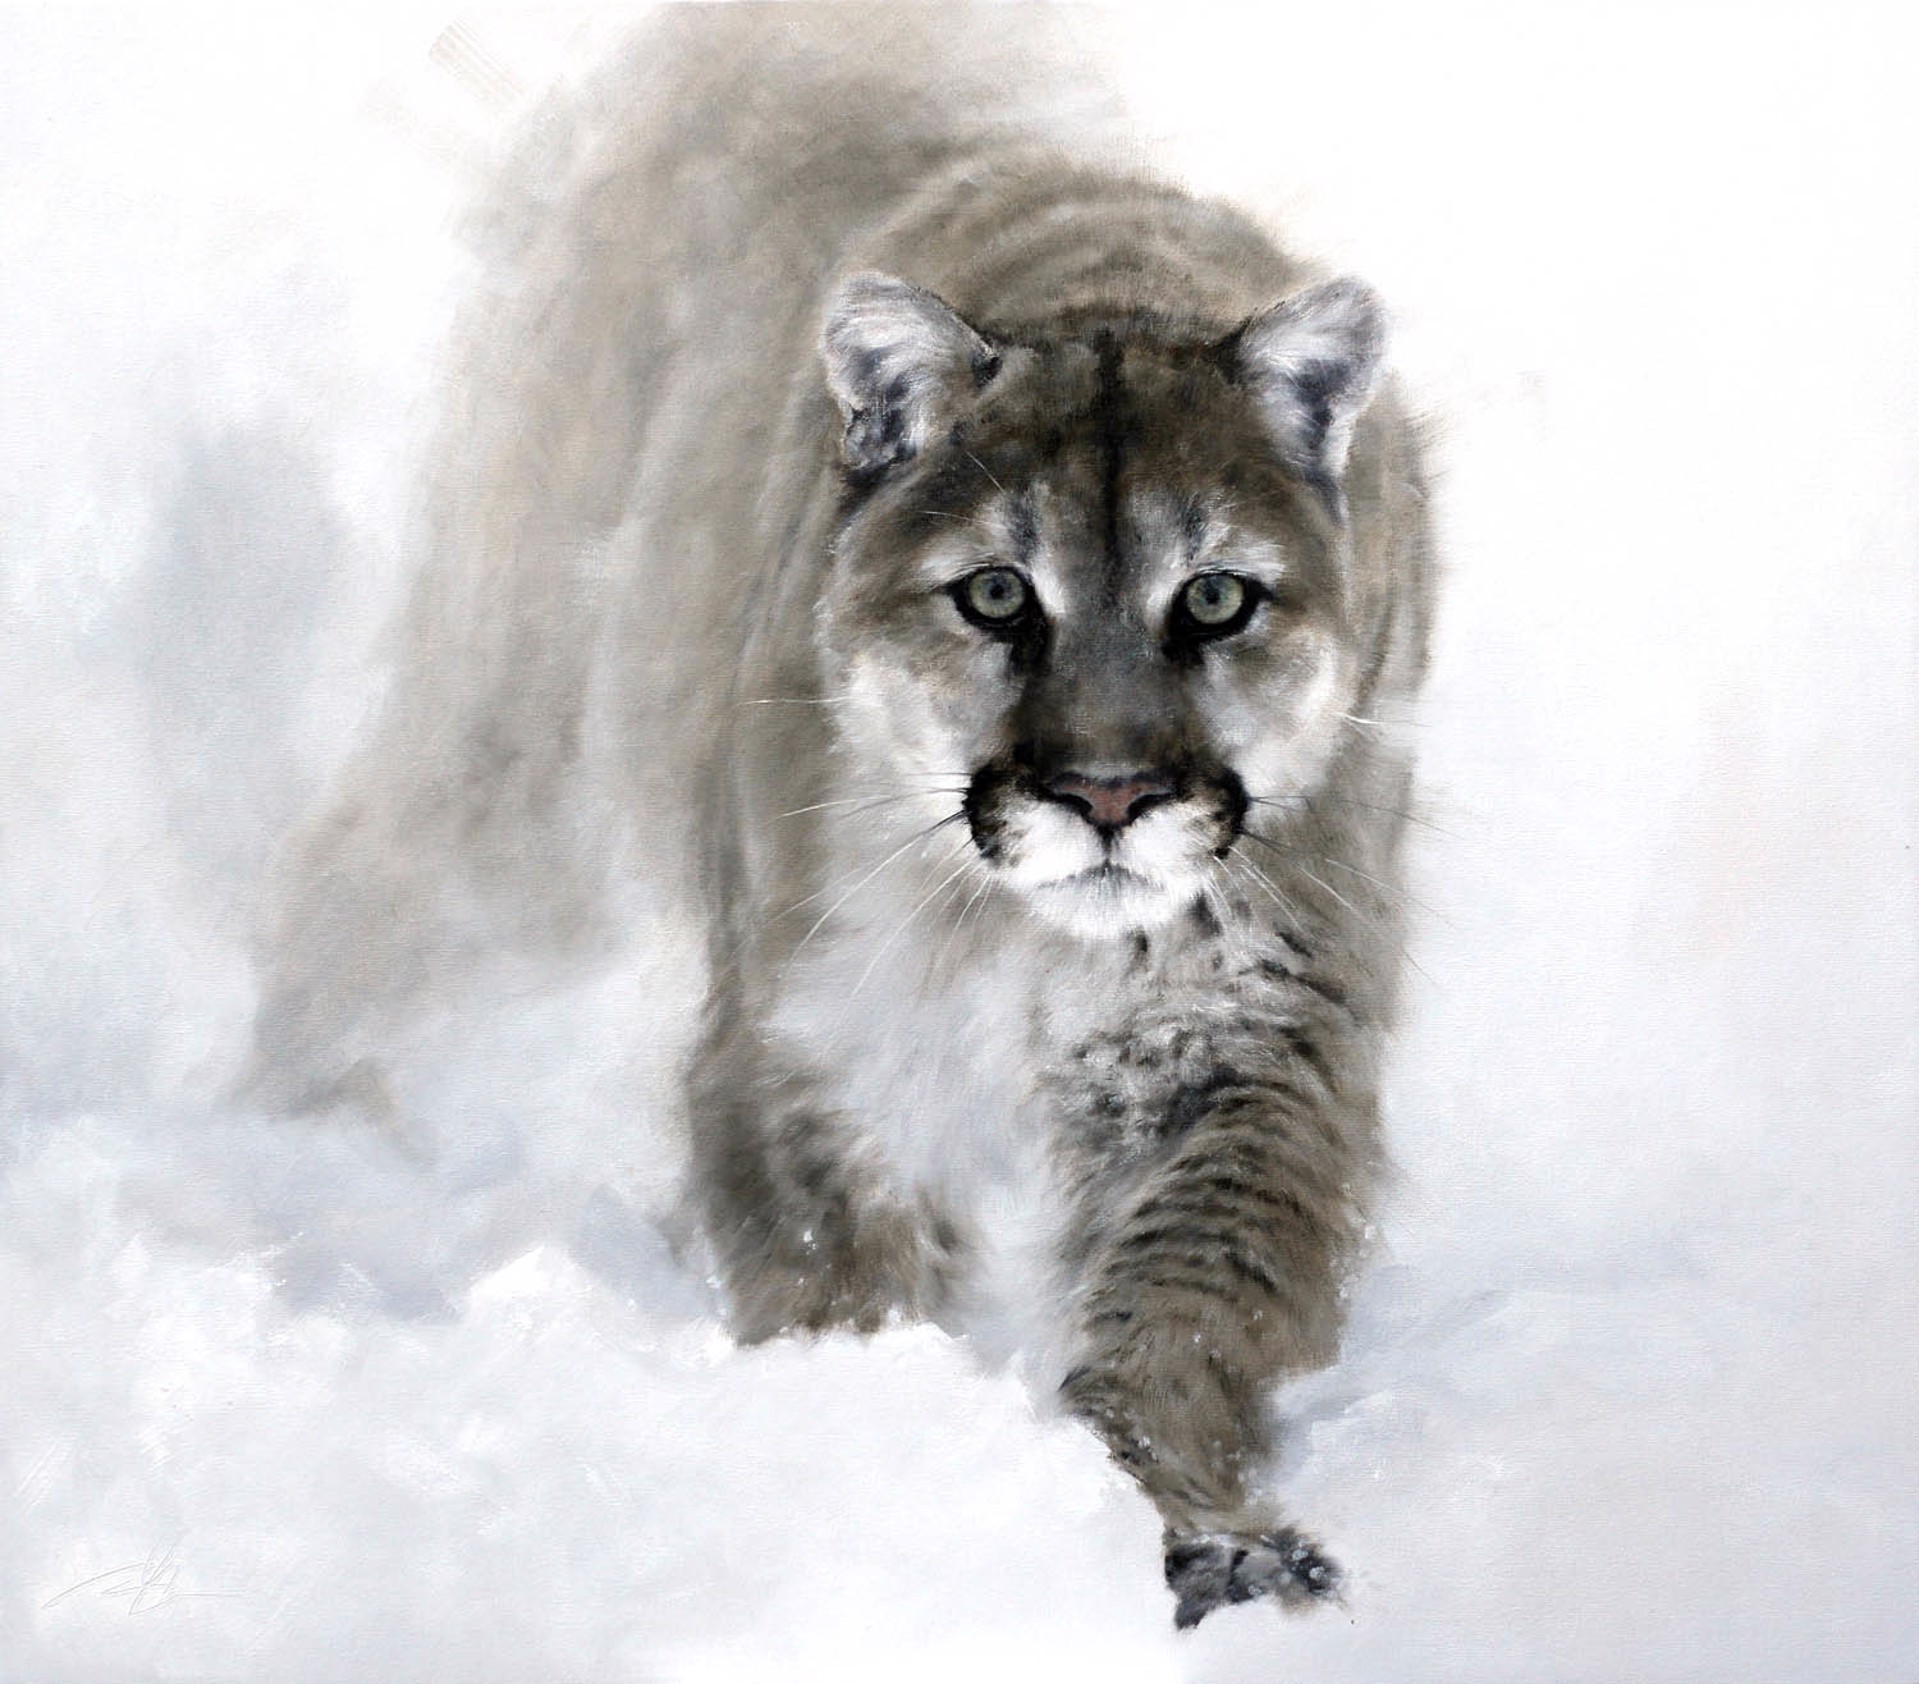 Original Oil Painting Featuring A Walking Mountain Lion Fading Into Snowy White Background